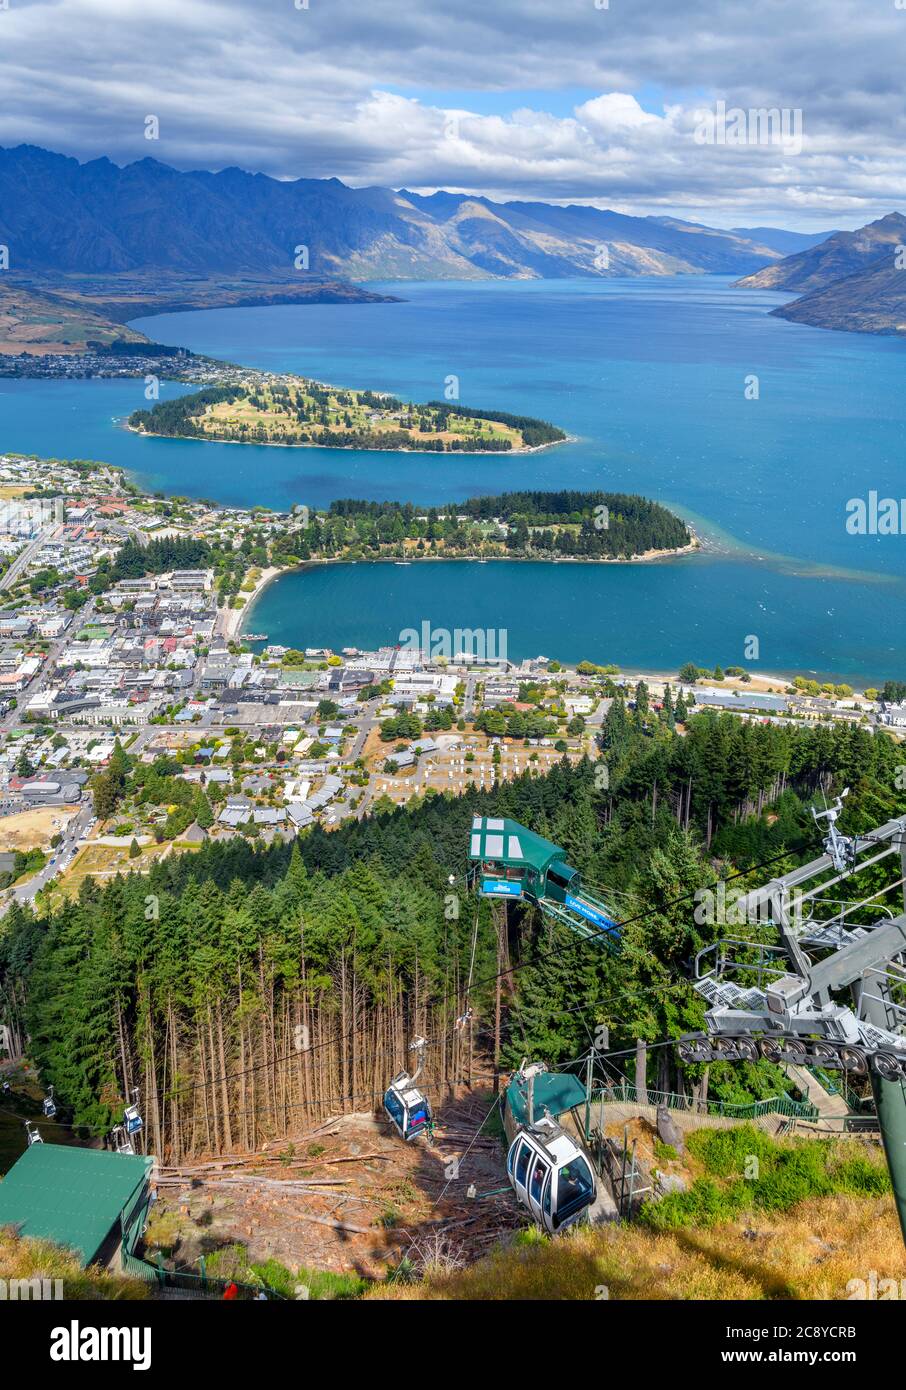 View over the city and Lake Wakatipu from top of the Skyline Gondola, Bob's Peak, Queenstown, New Zealand Stock Photo